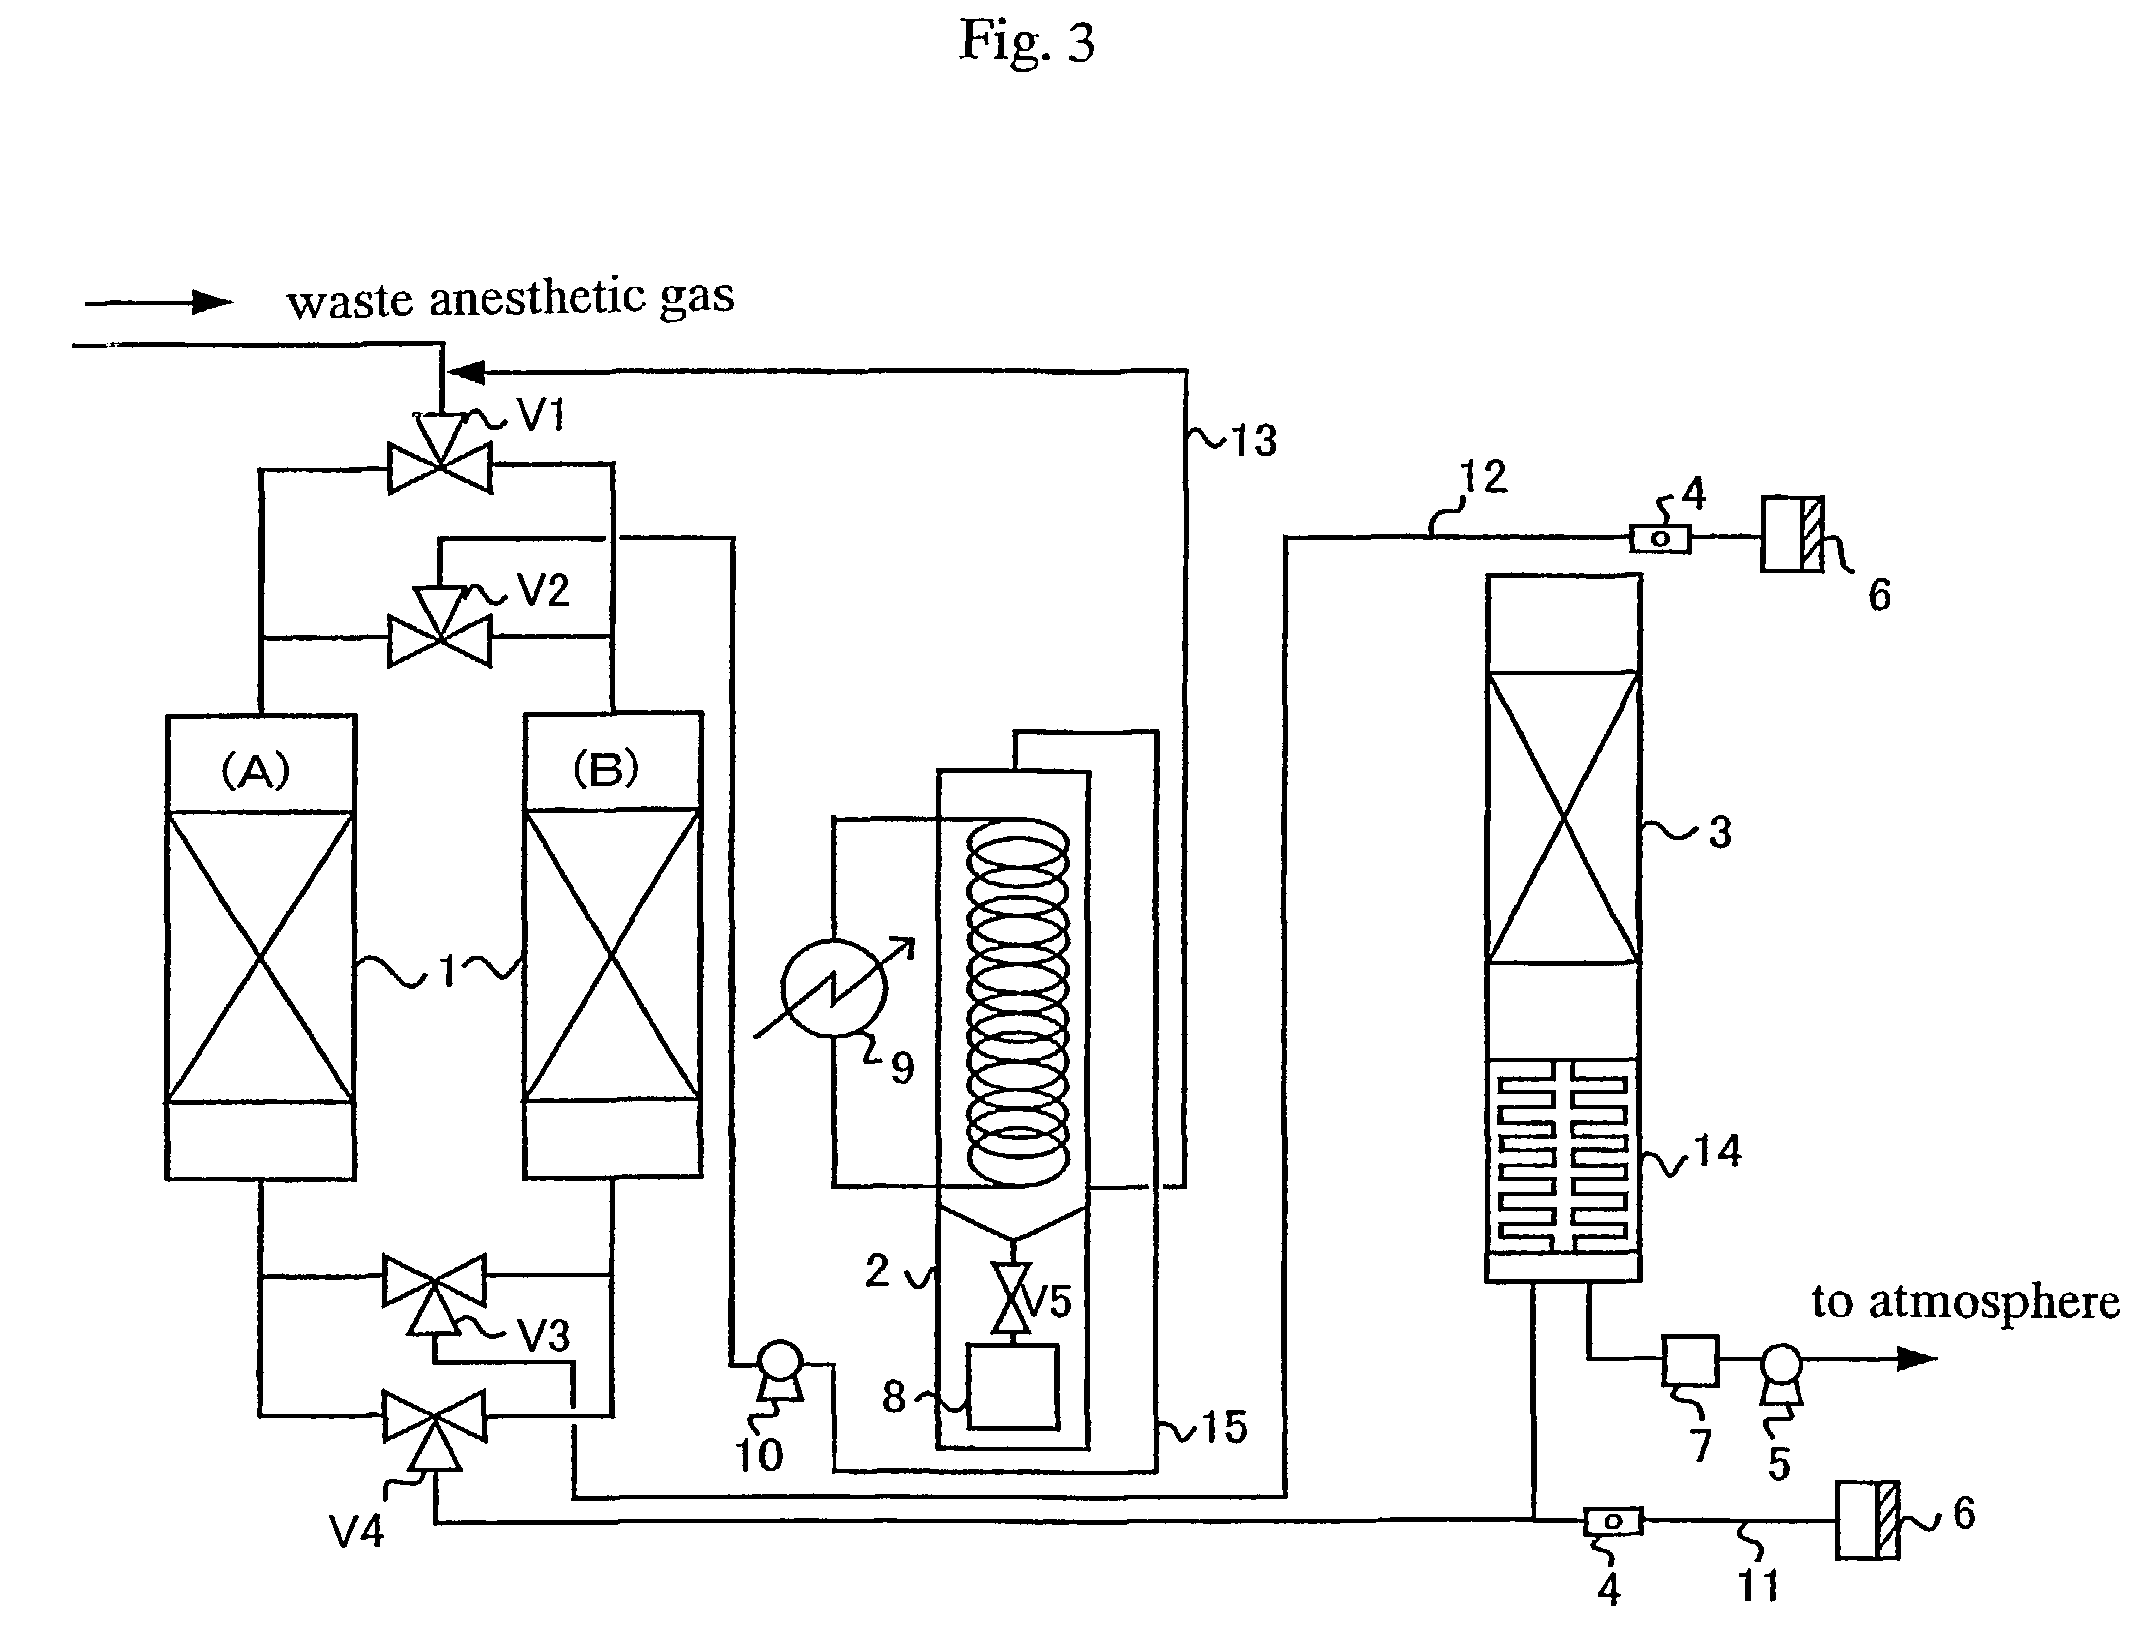 Process for treating waste anesthetic gas